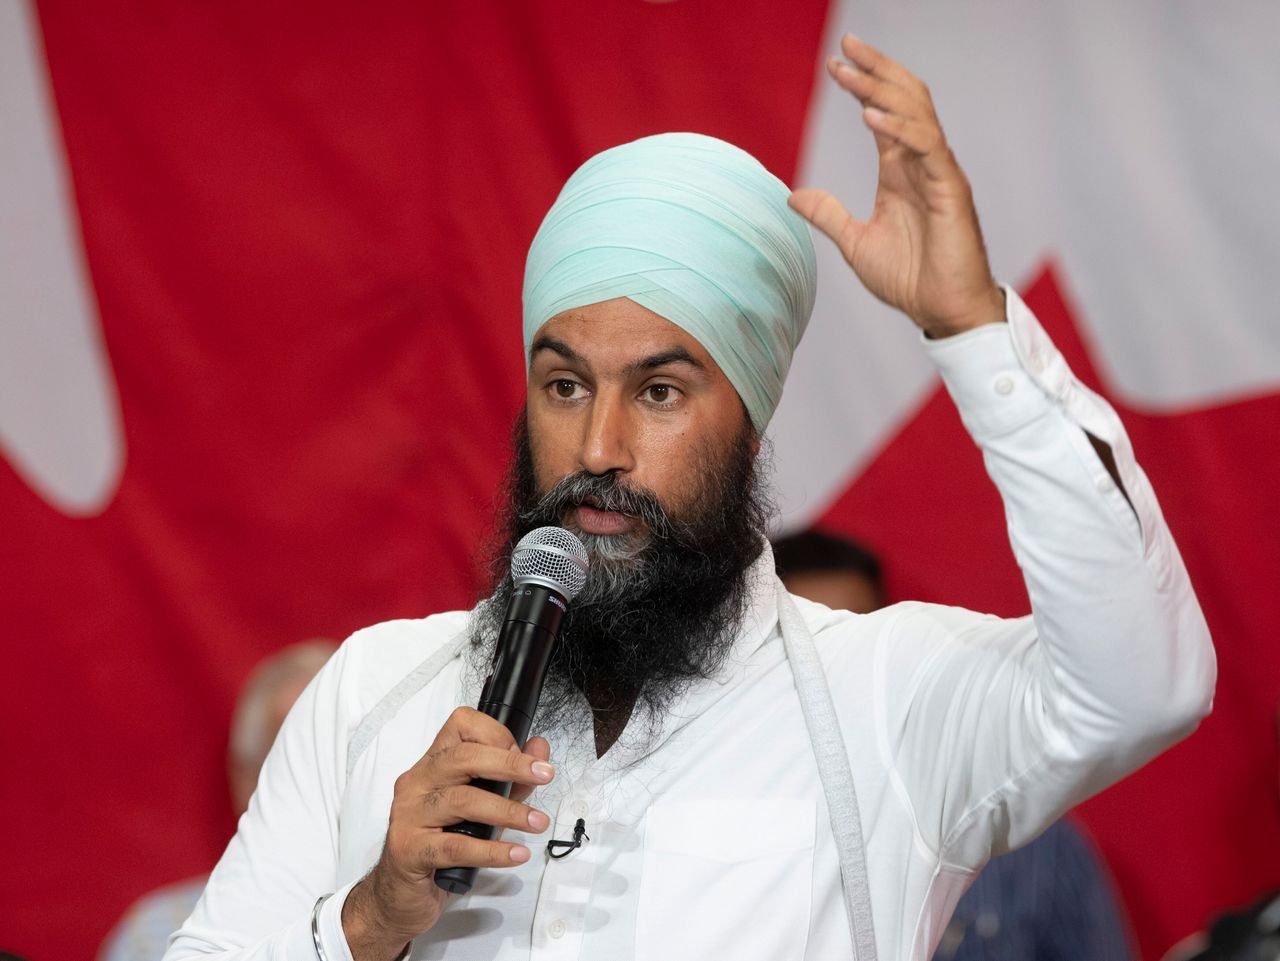 NDP Leader Jagmeet Singh responds to questions from the media after a town hall in Toronto on Sept. 18, 2019.